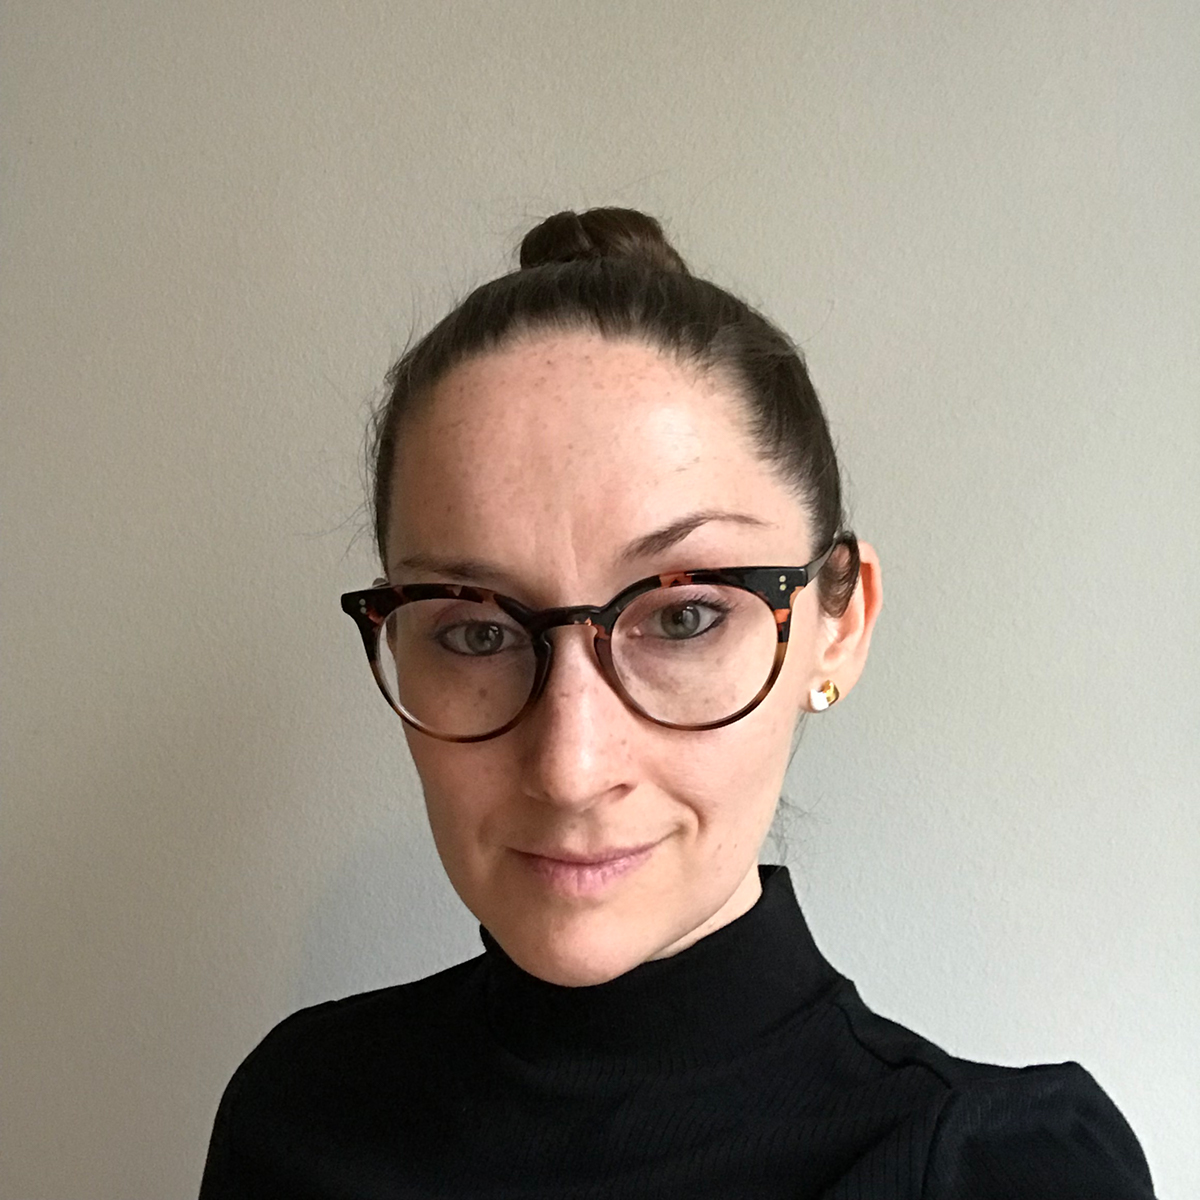 Headshot of M.L. Martin, a white non-binary poet with dark hair pulled back into a high bun wearing a black turtleneck and oversized glasses with black frames